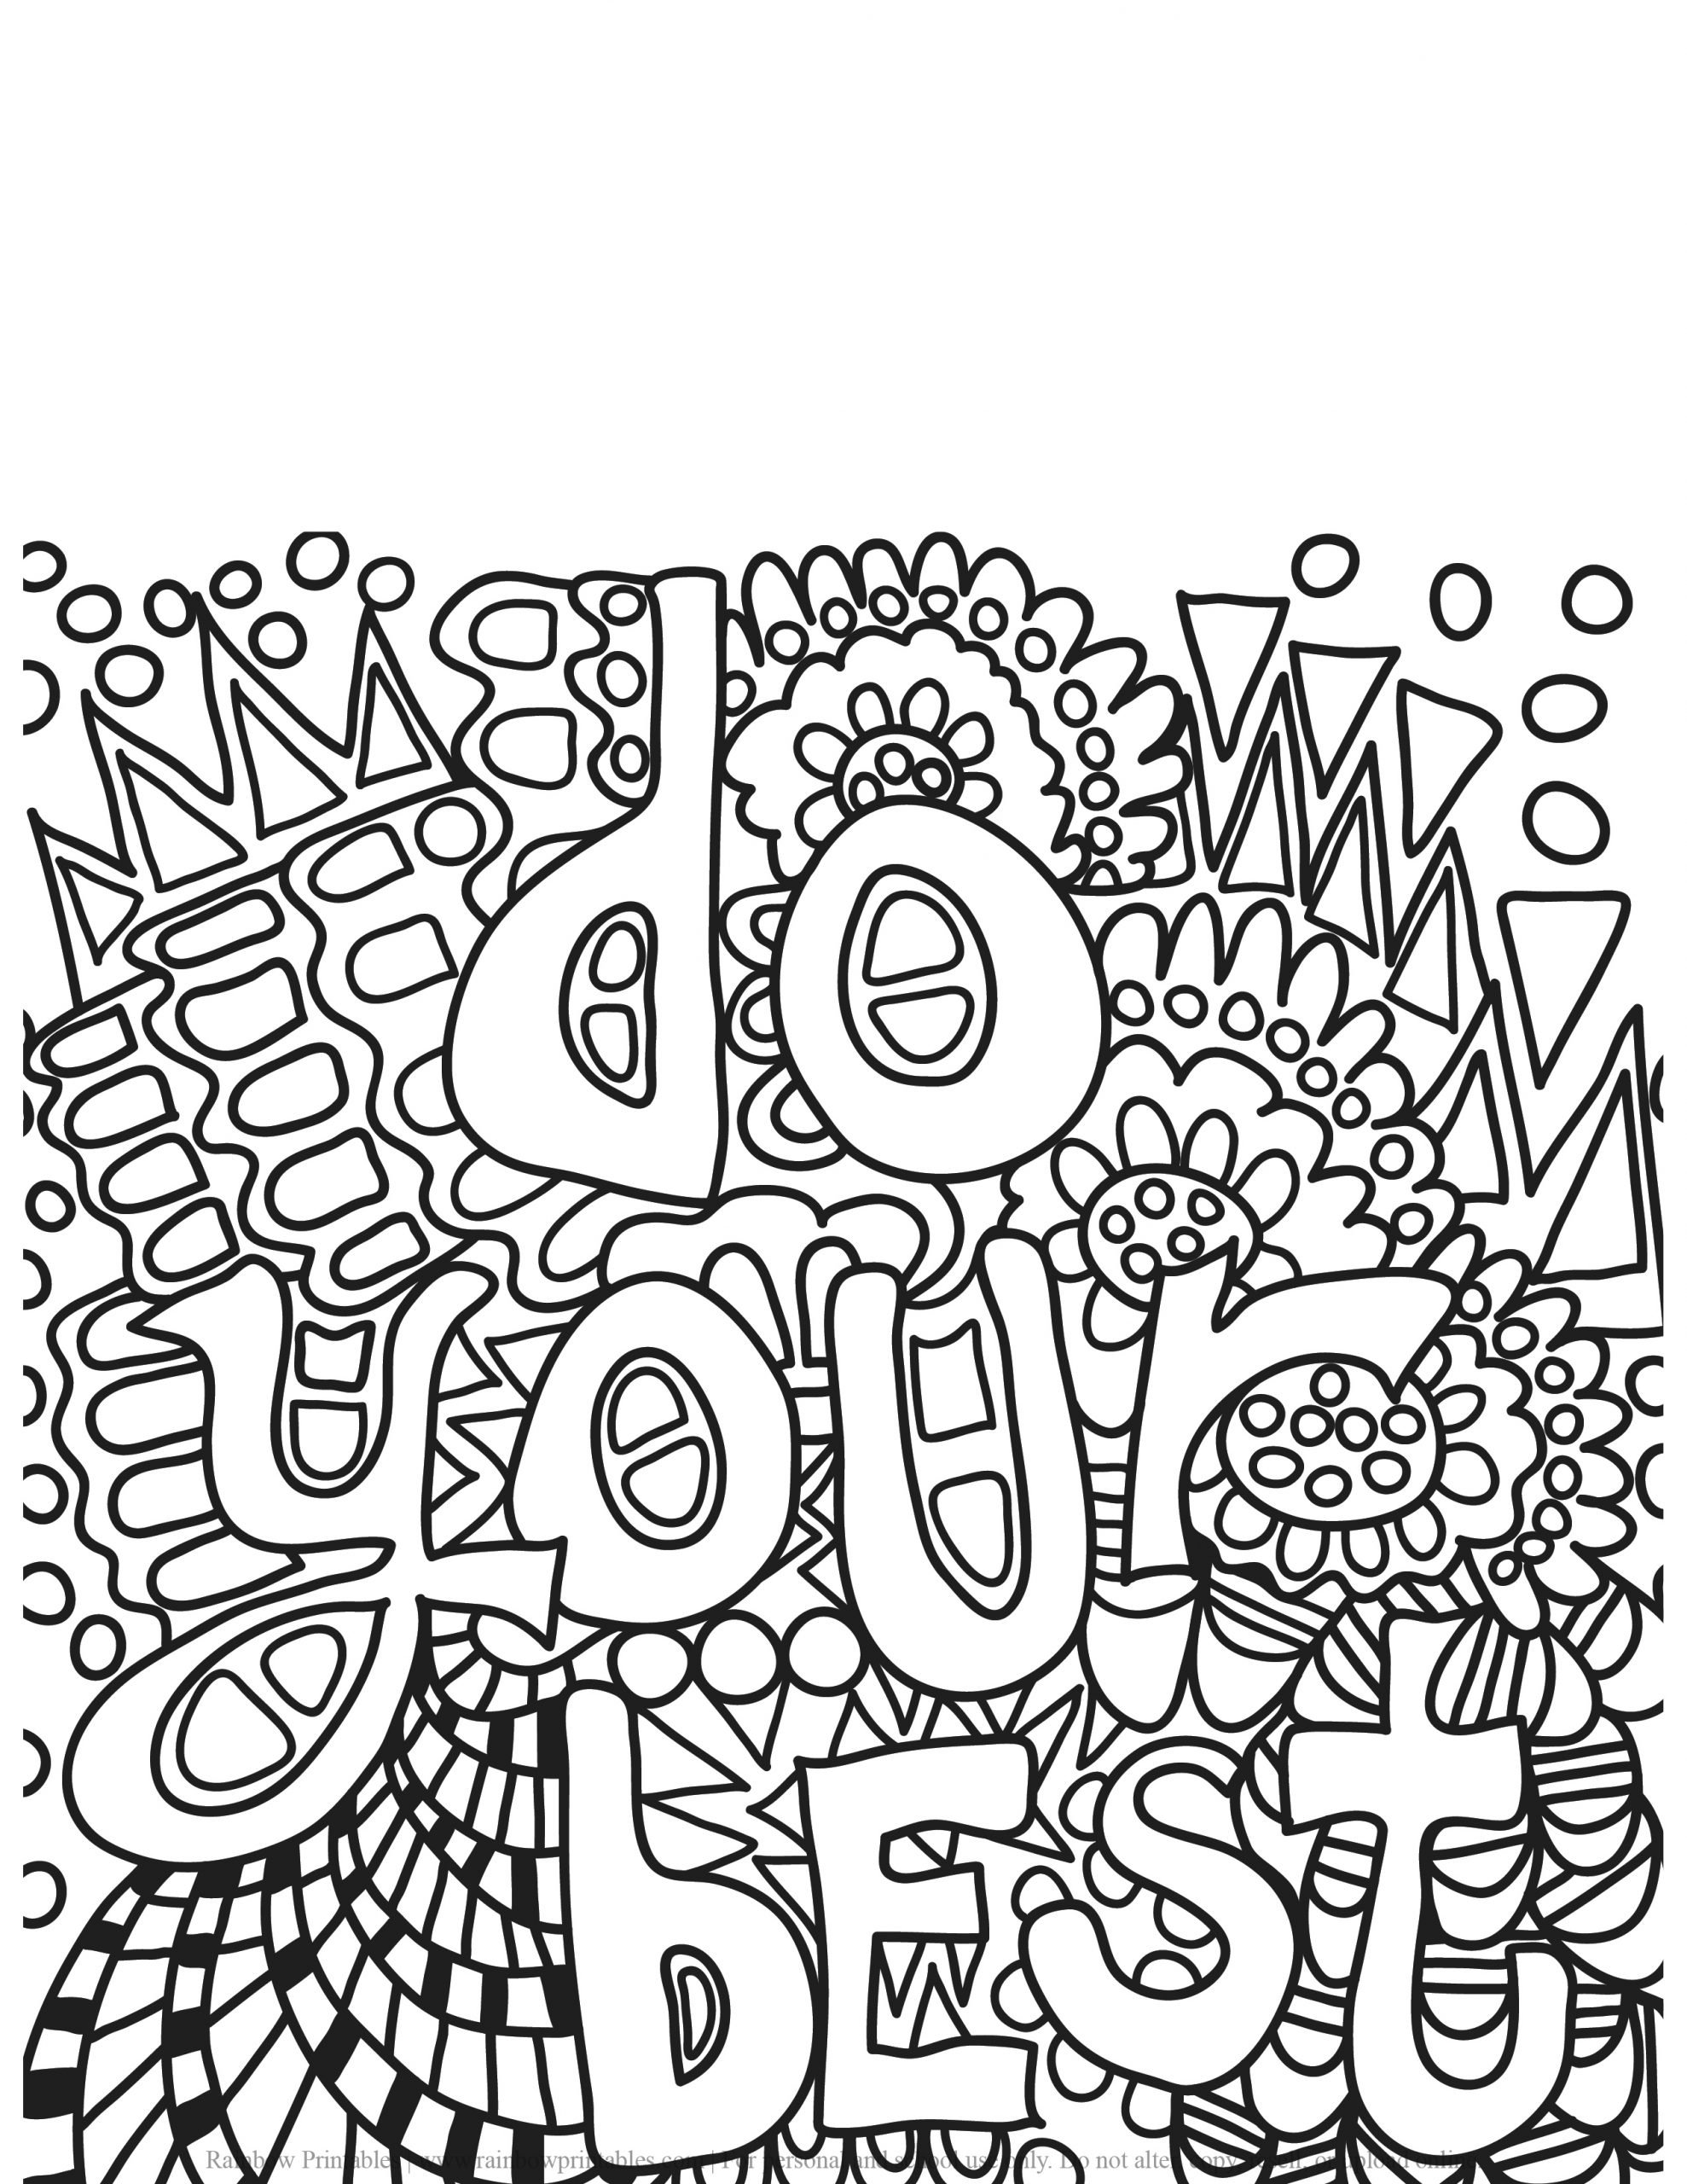 ADULT COLORING PAGES ANTI-STRESS RELIEF PRINTABLE MANDALA PATTERN RELAXING ACTIVITY PRINTABLE INSPIRING QUOTES